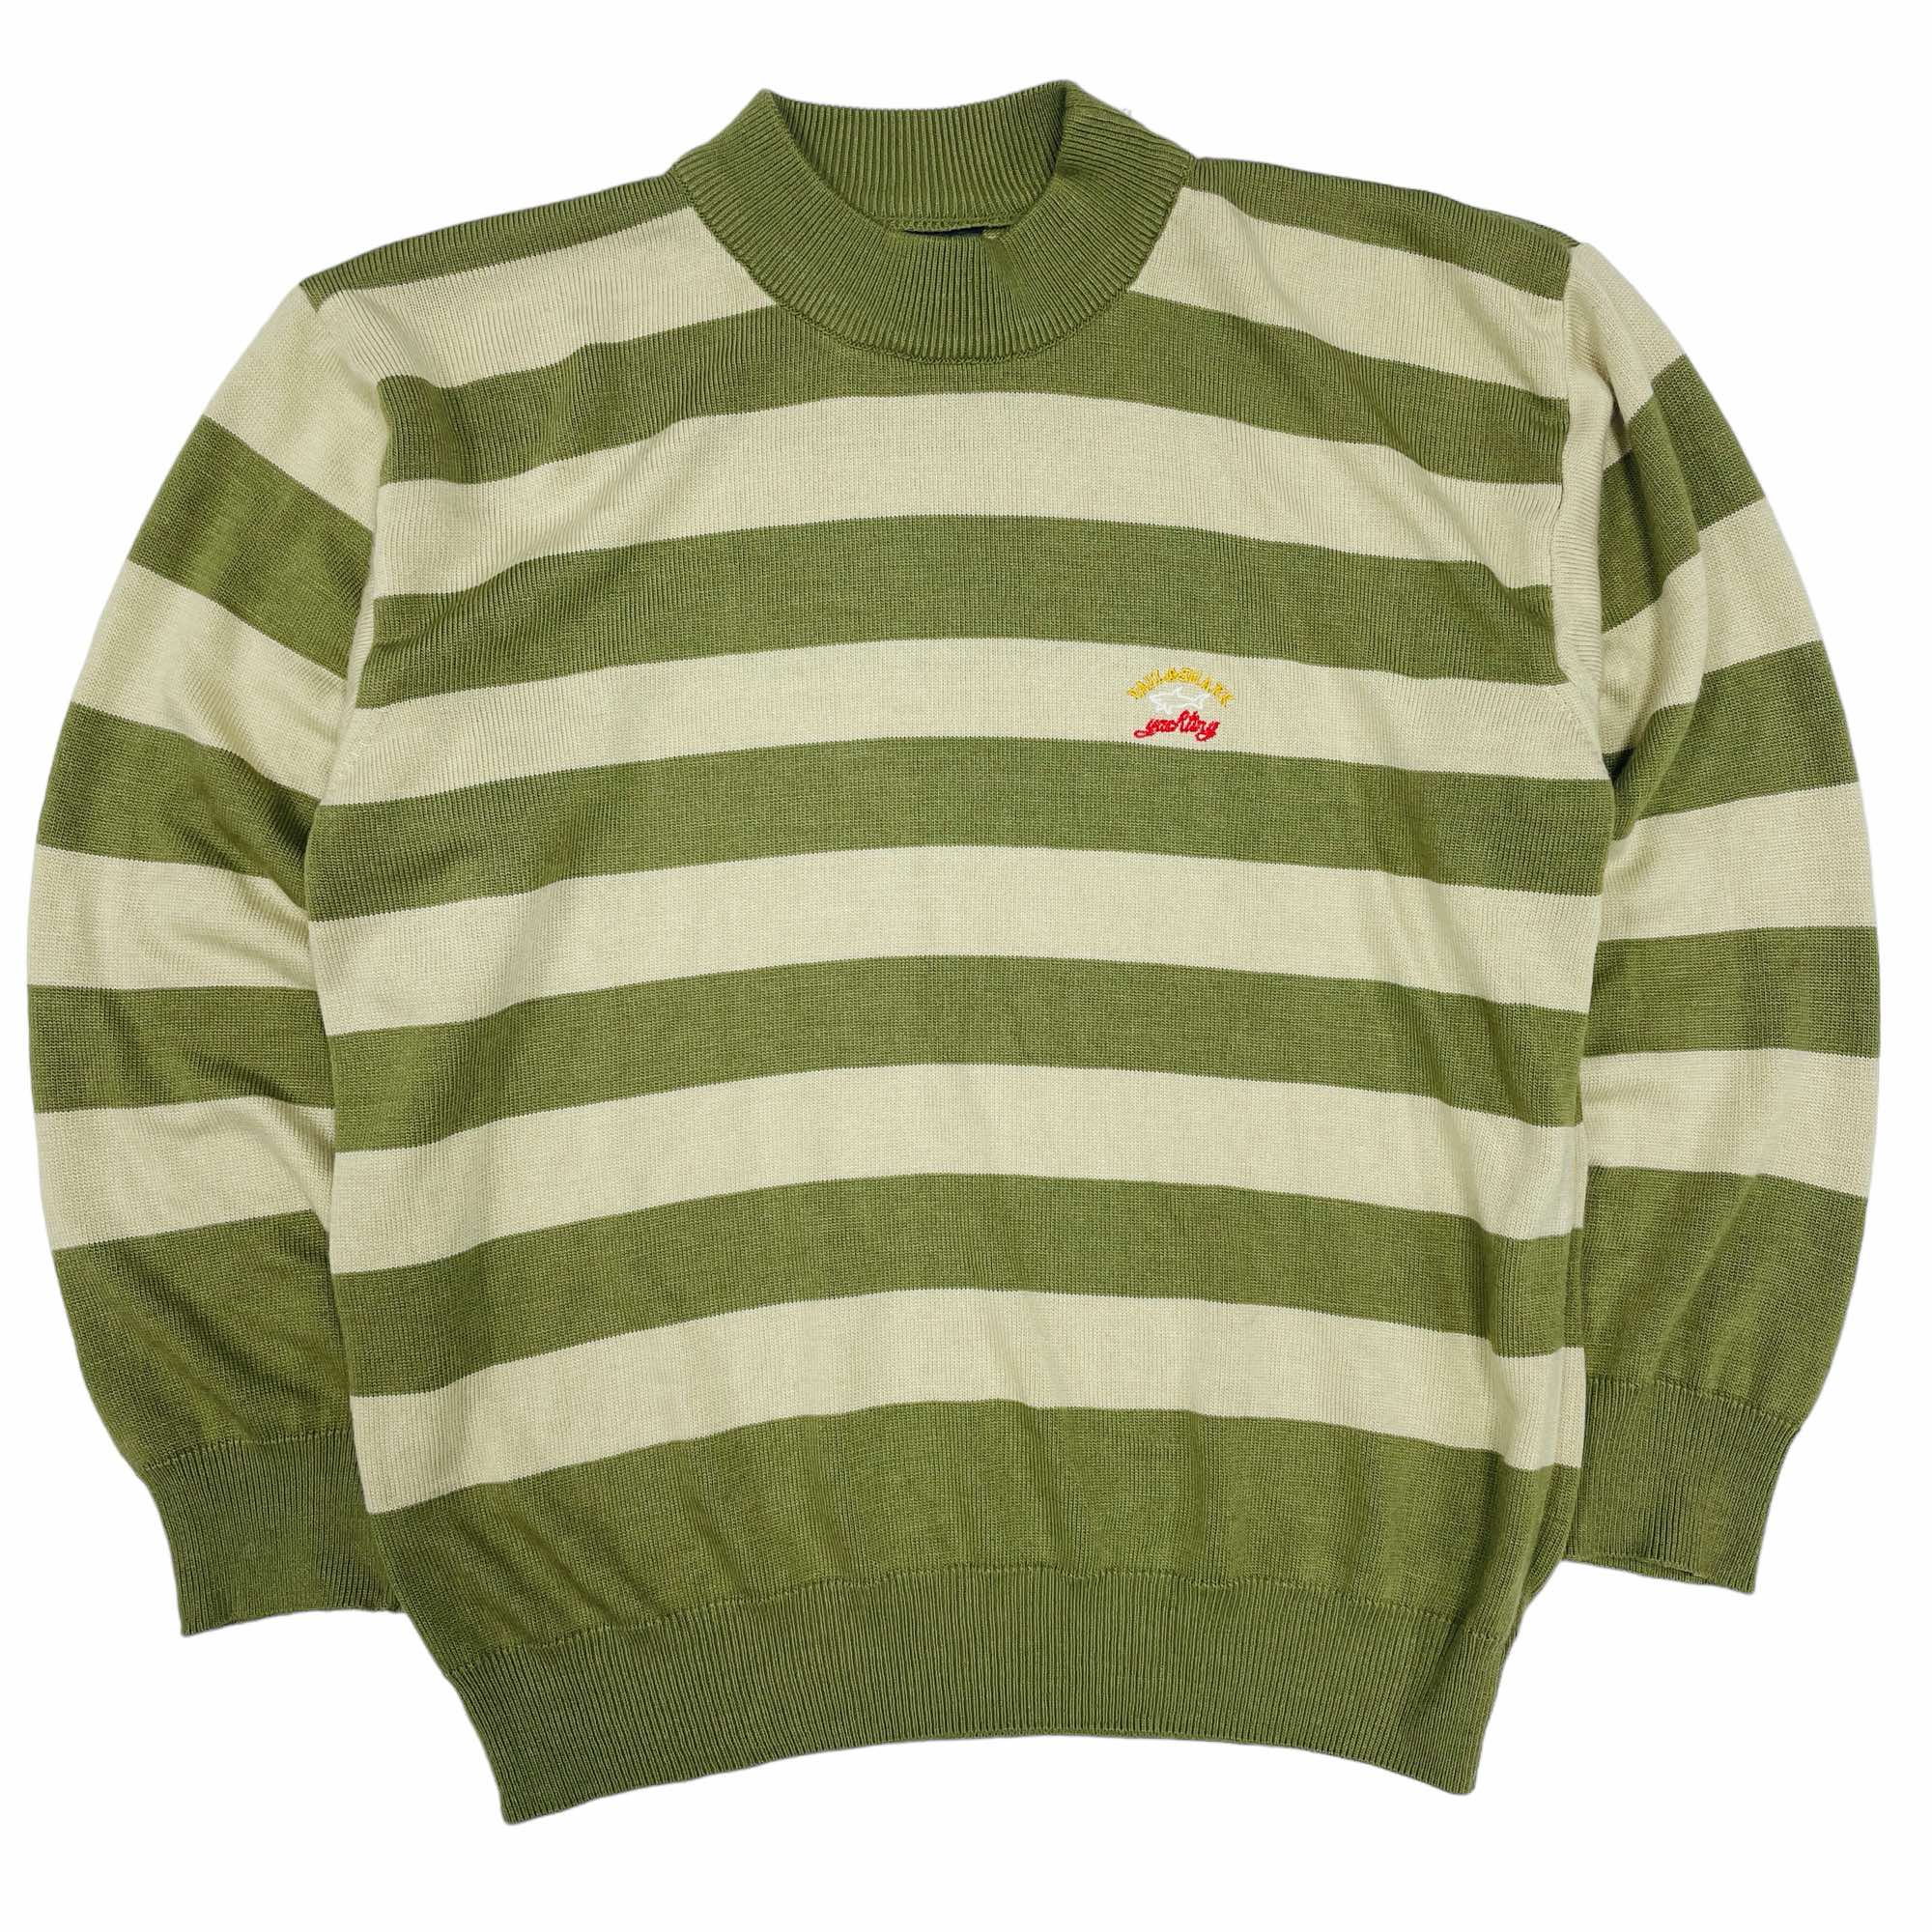 Paul and Shark Striped Knitted Jumper - Large